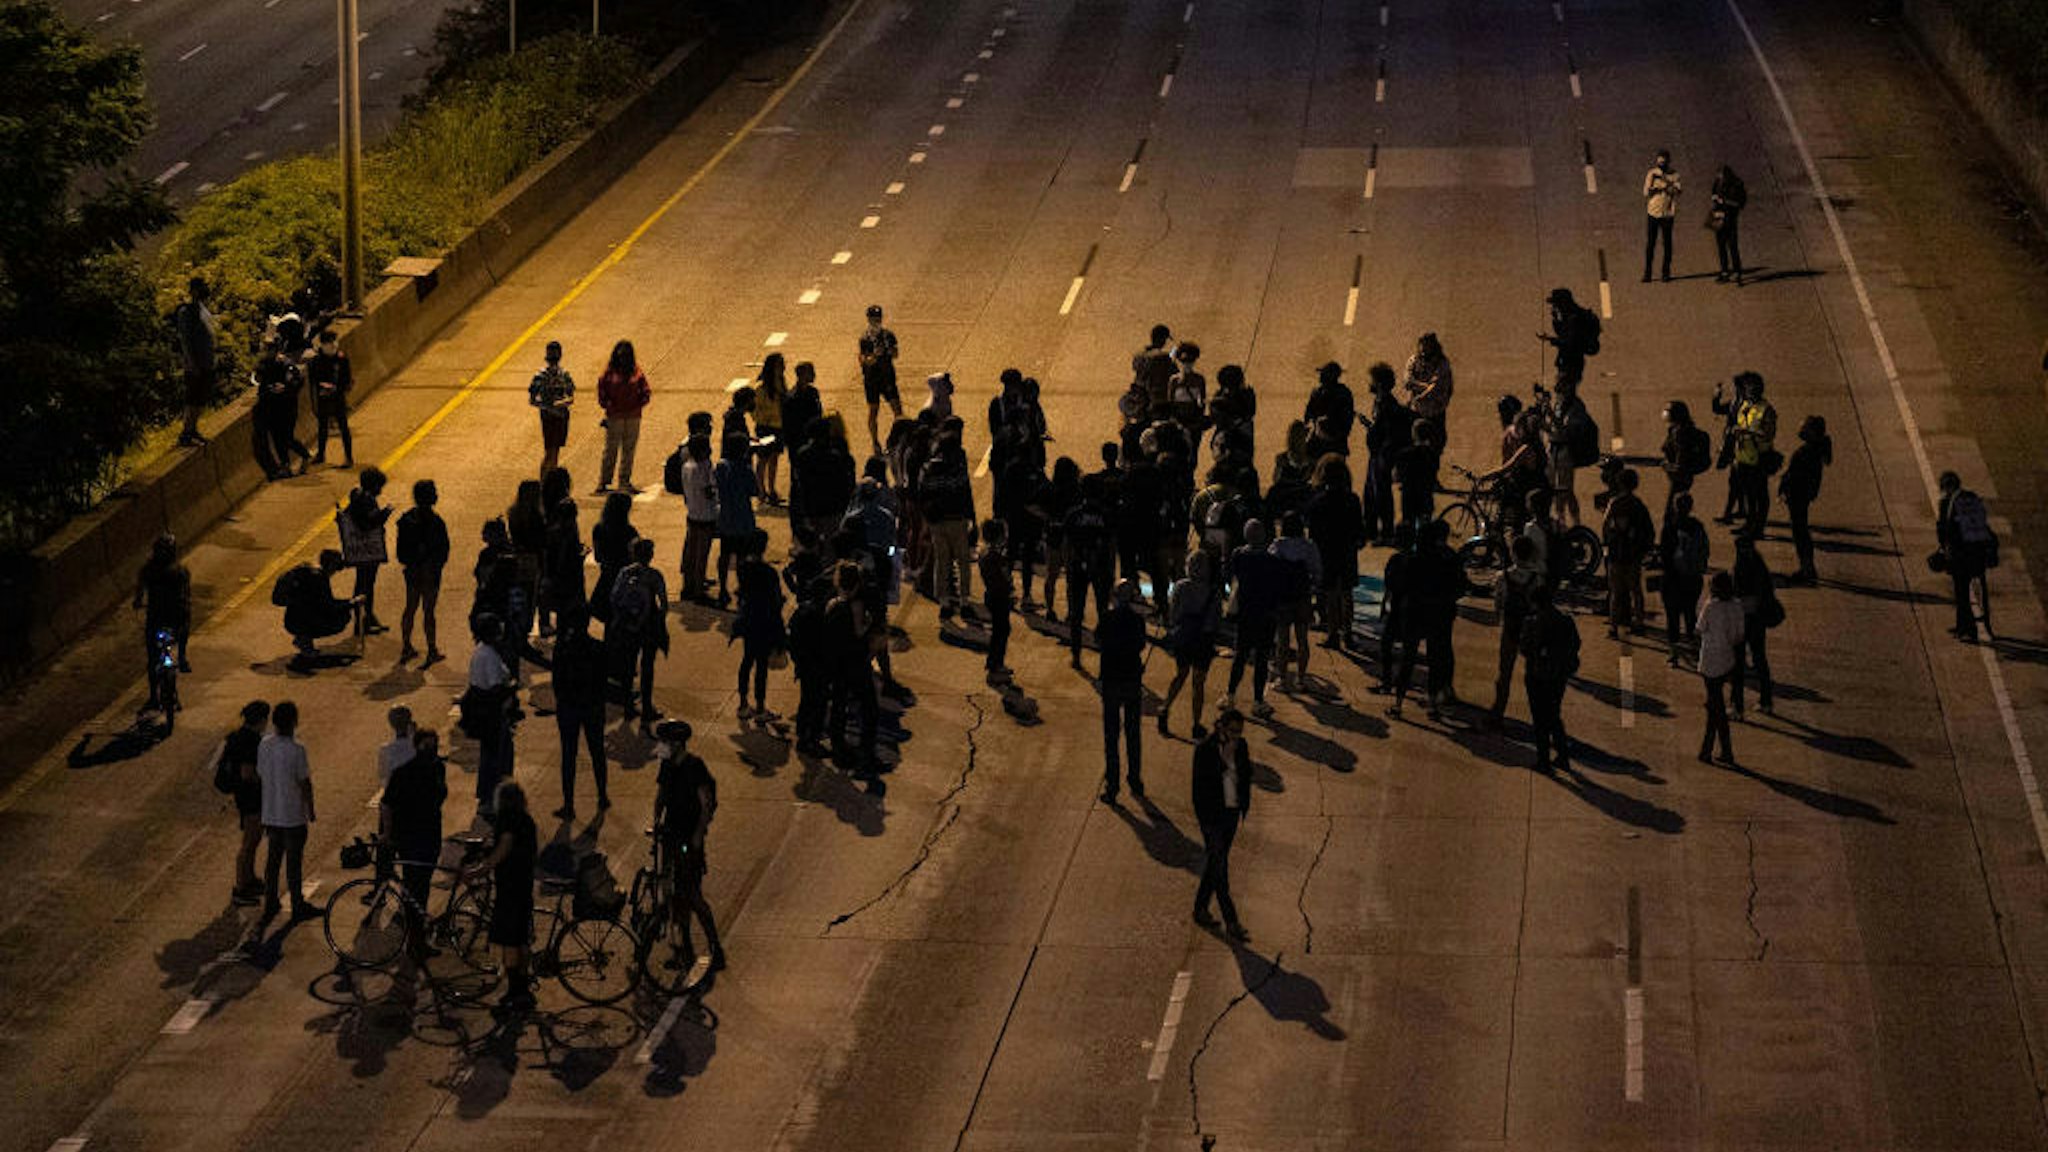 Protesters gather on Interstate 5 after marching there from the area known as the Capitol Hill Organized Protest (CHOP) on June 23, 2020 in Seattle, Washington. On Monday, Seattle Mayor Jenny Durkan said that the city would phase down the CHOP zone and that the Seattle Police Department would return to its vacated East Precinct. (Photo by David Ryder/Getty Images)